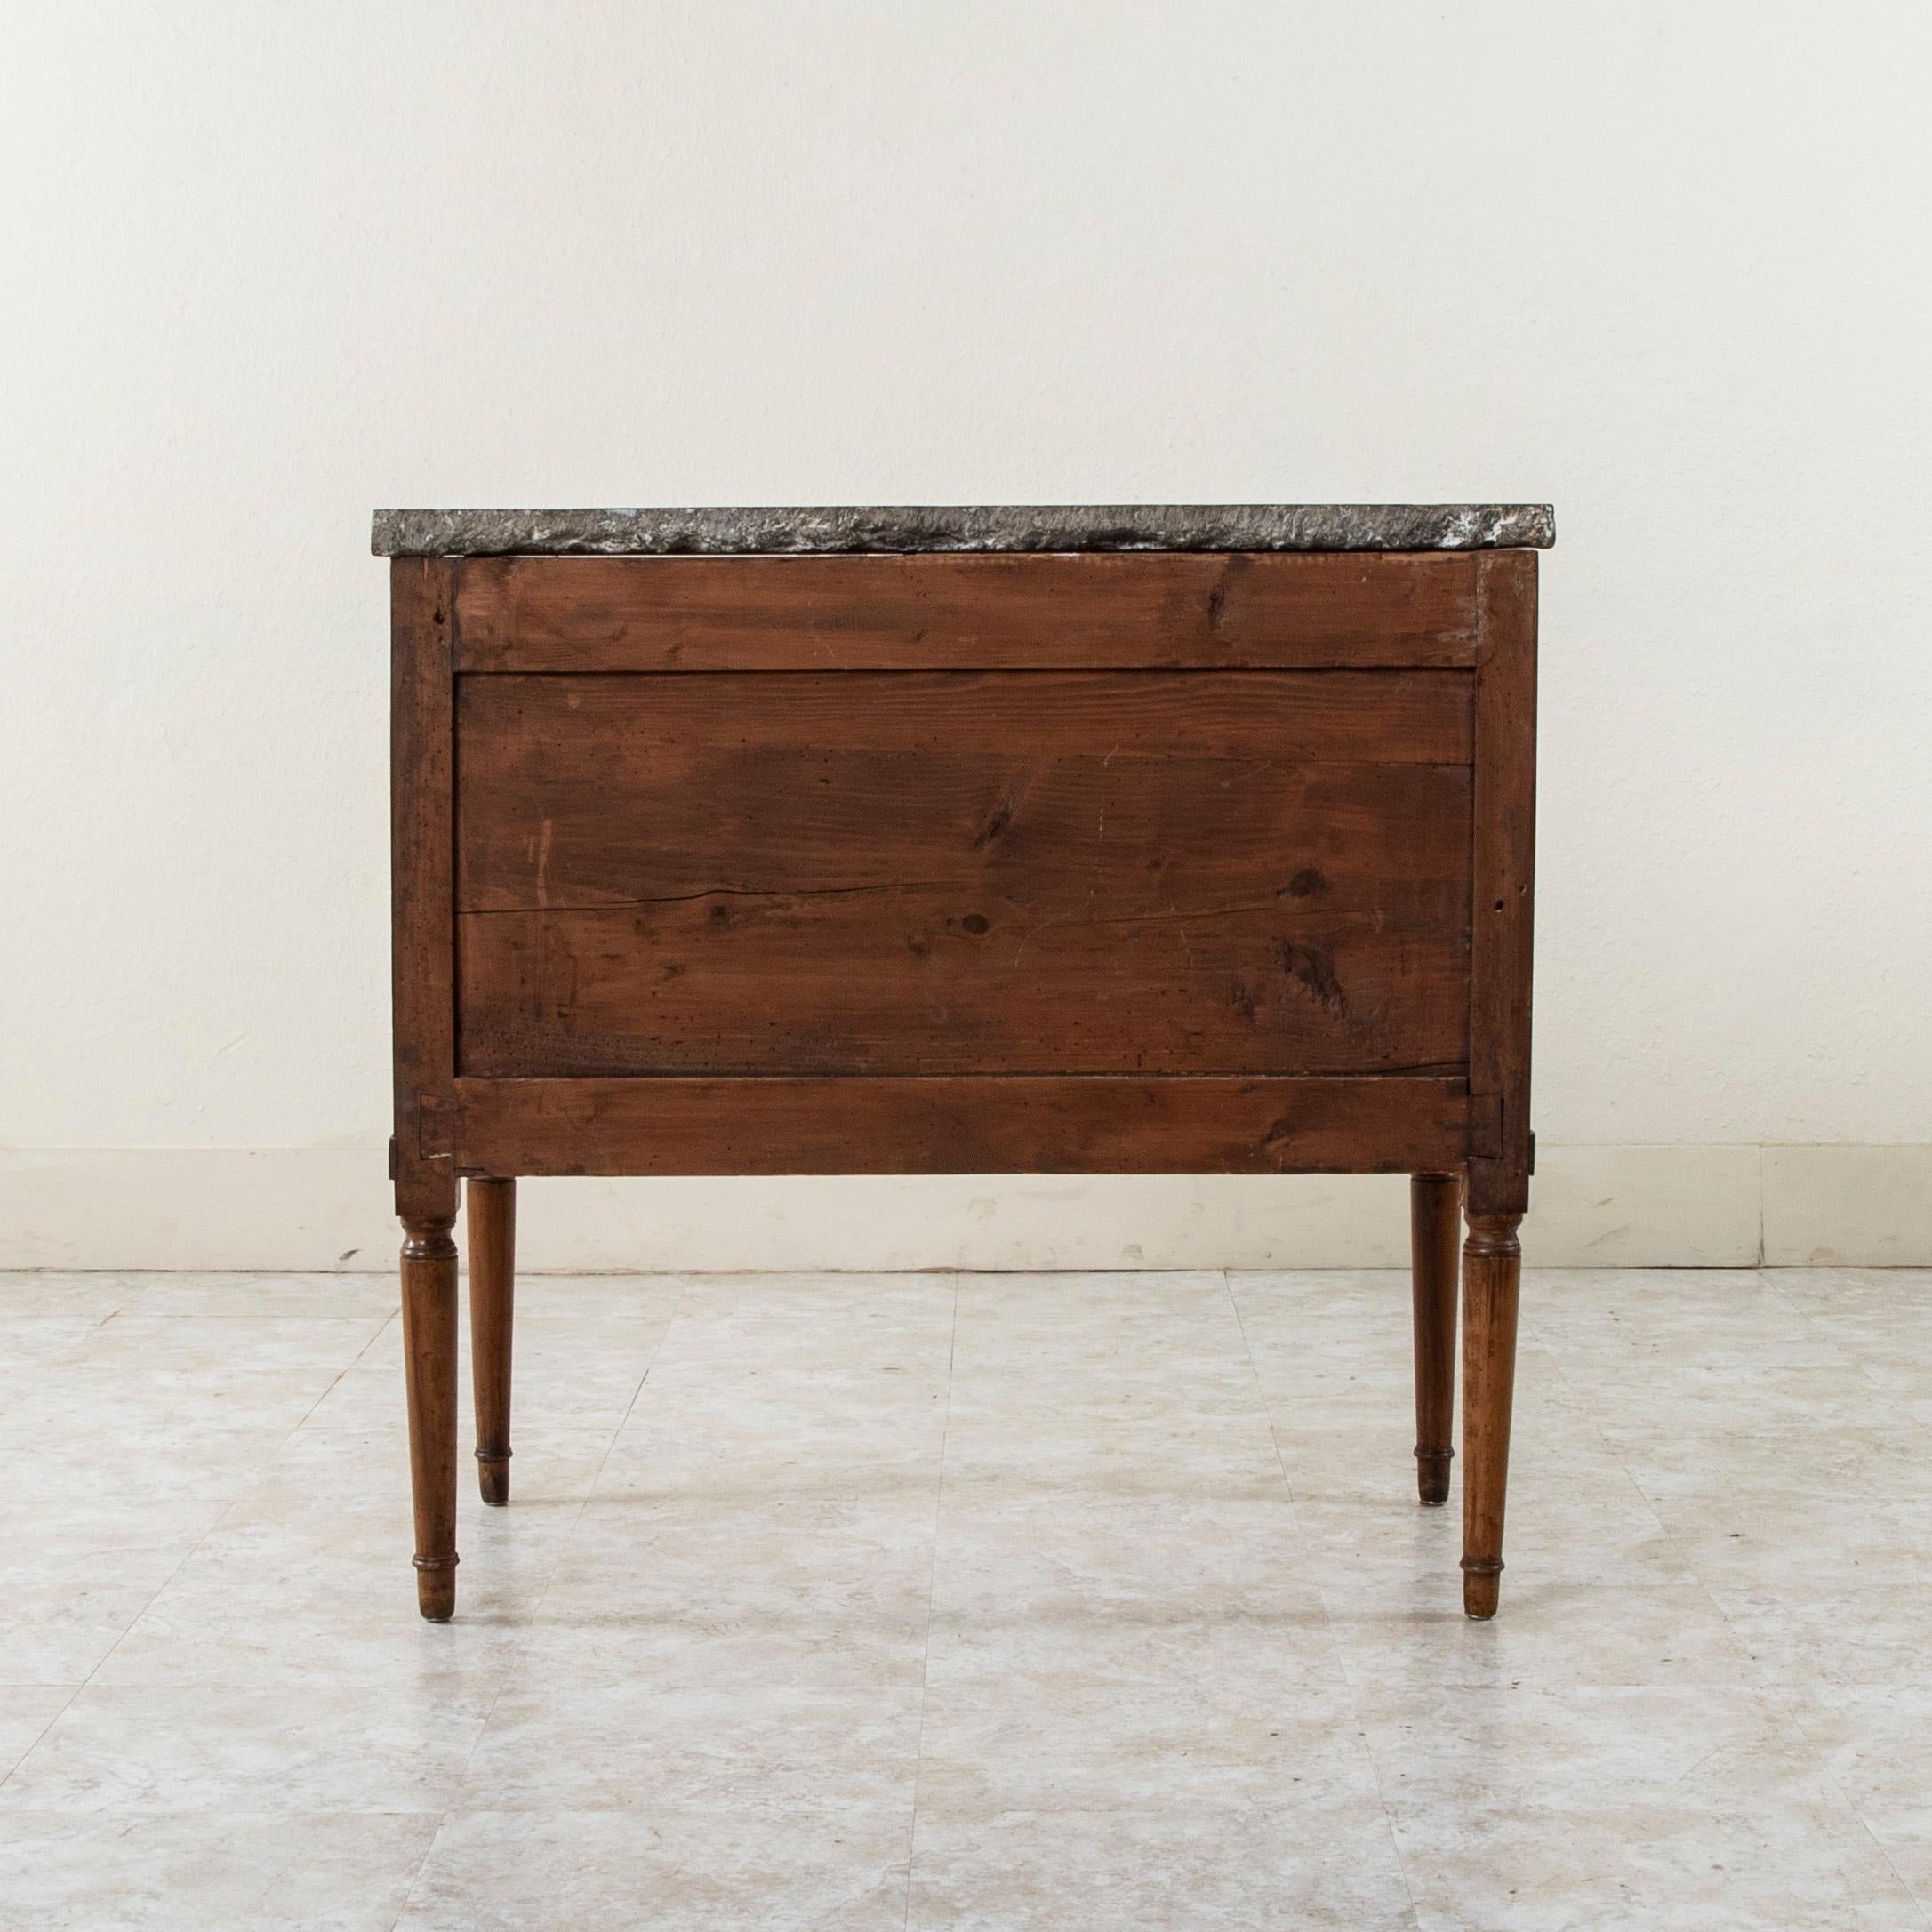 Small Scale Late 18th Century French Louis XVI Period Walnut Chest, Marble Top For Sale 1